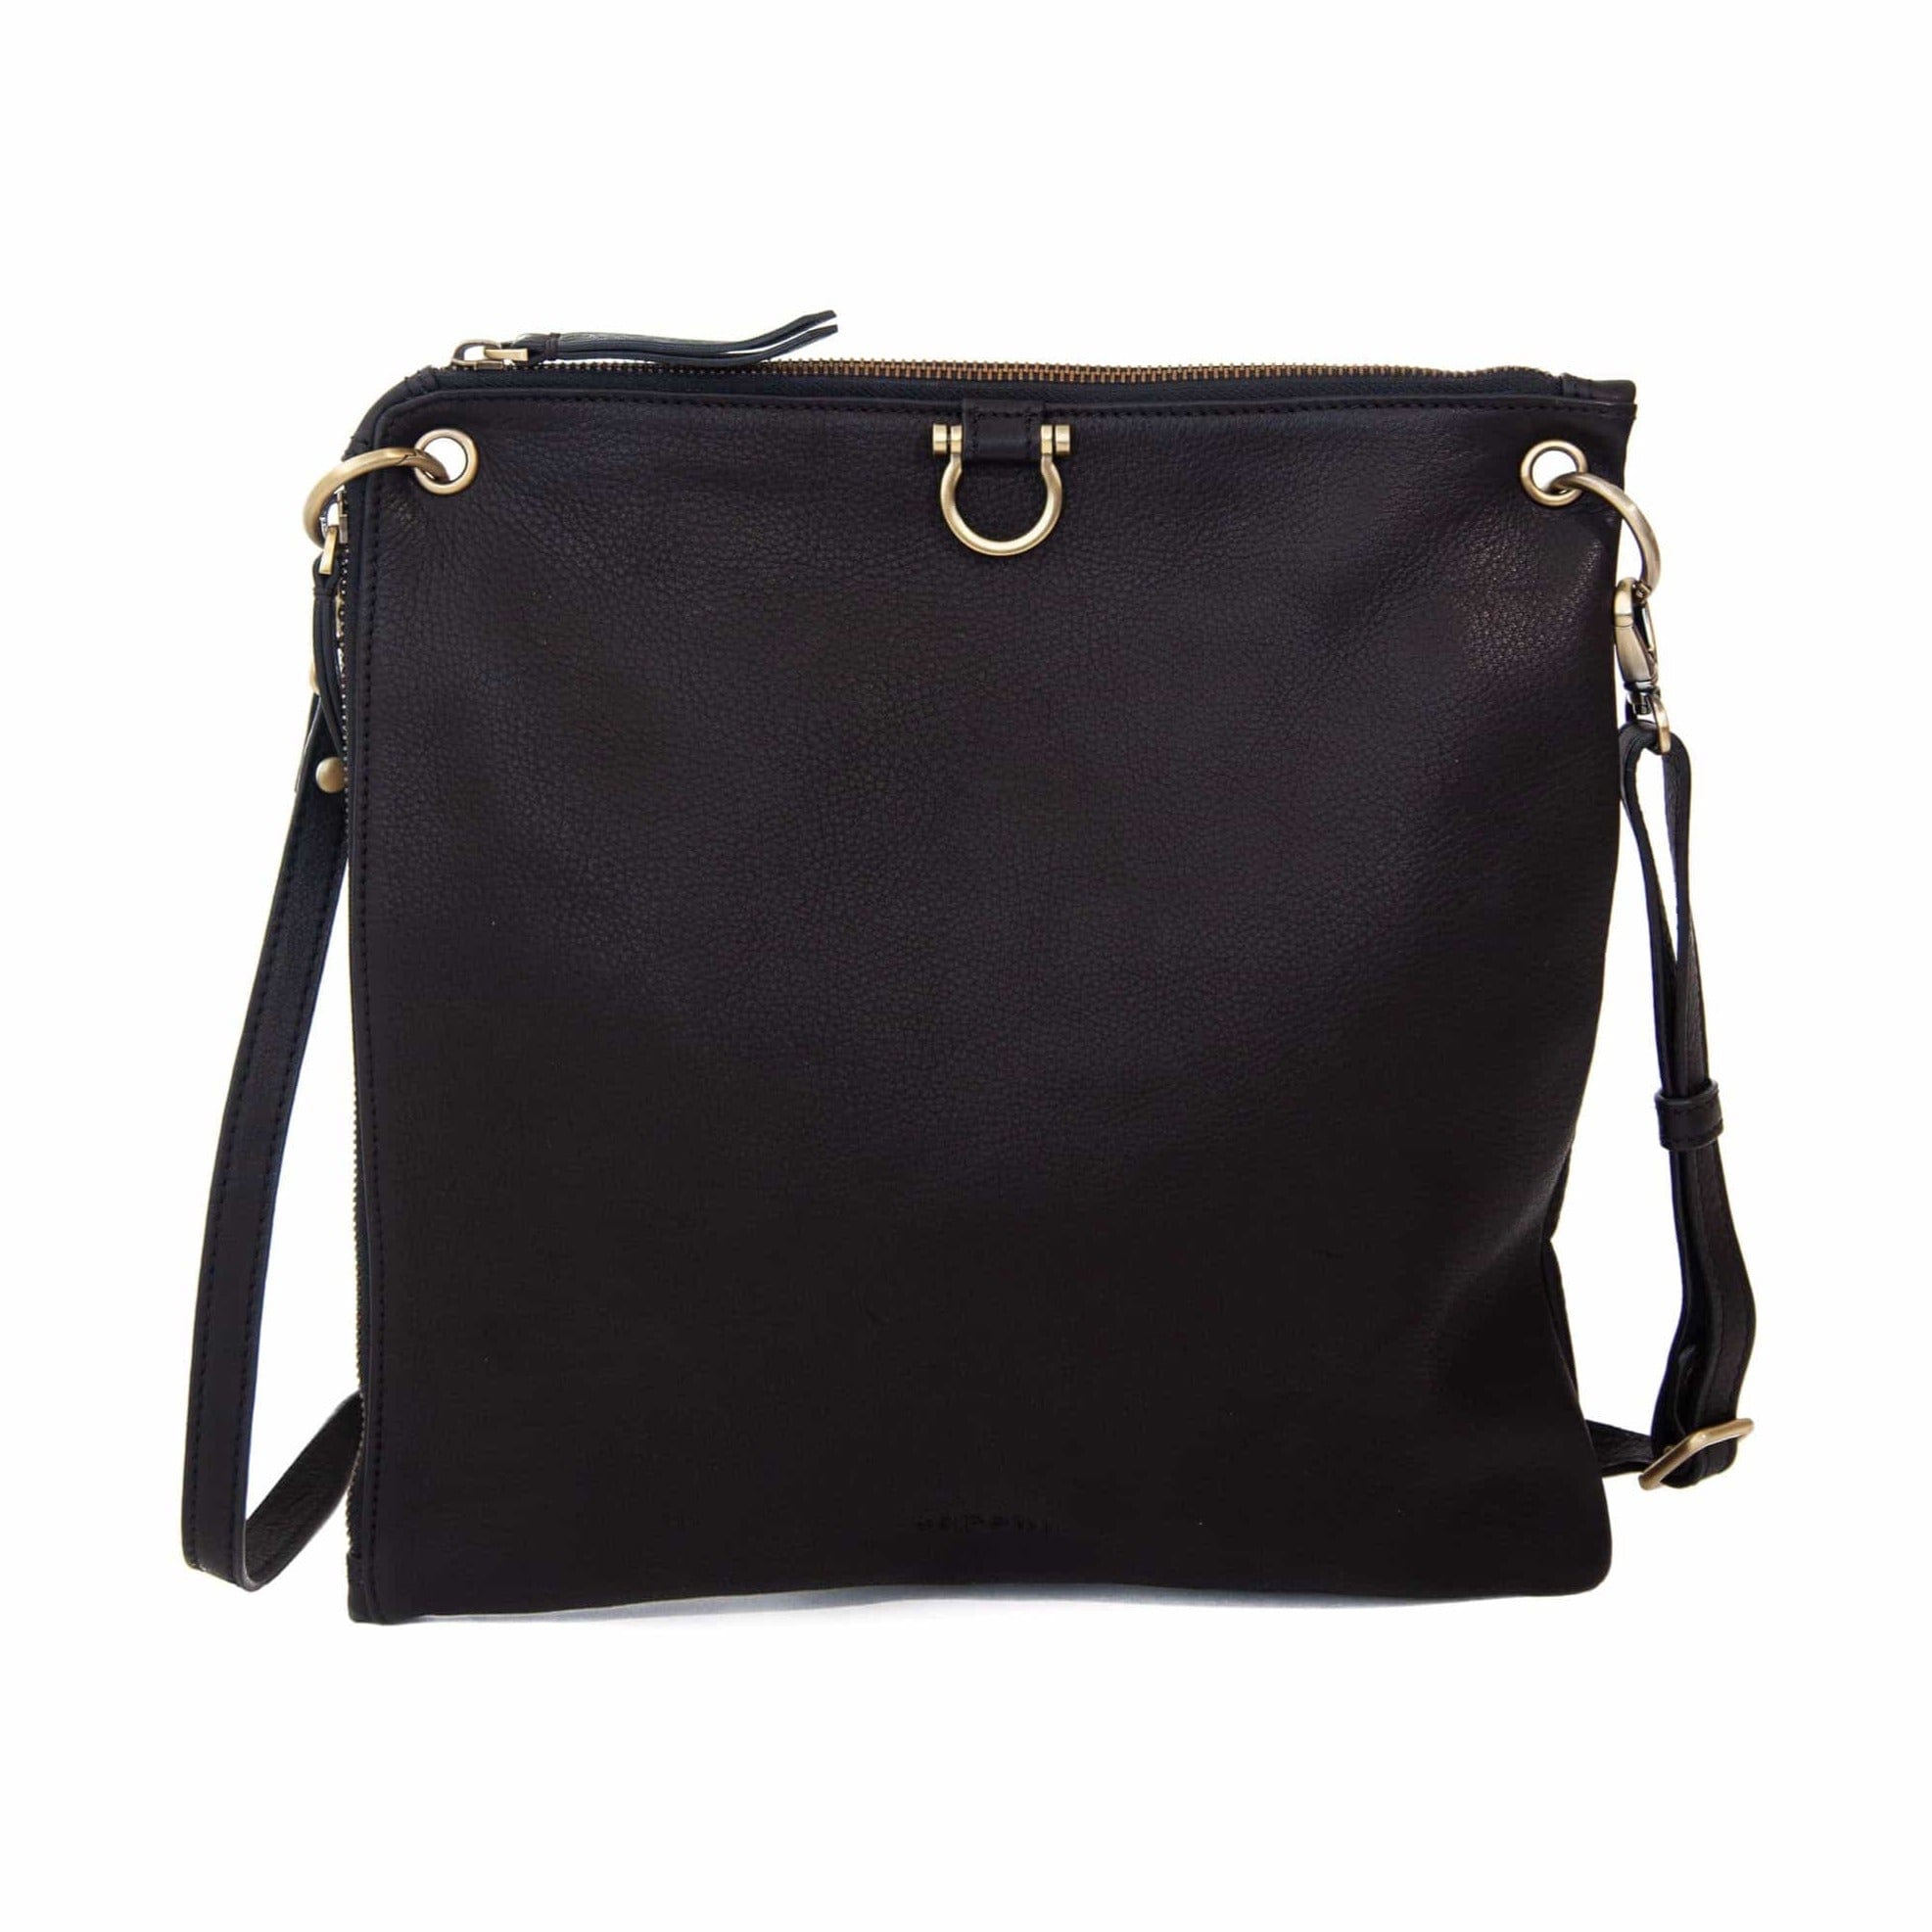 The Rin crossbody bag in black raw leather has Omega brass hardware.